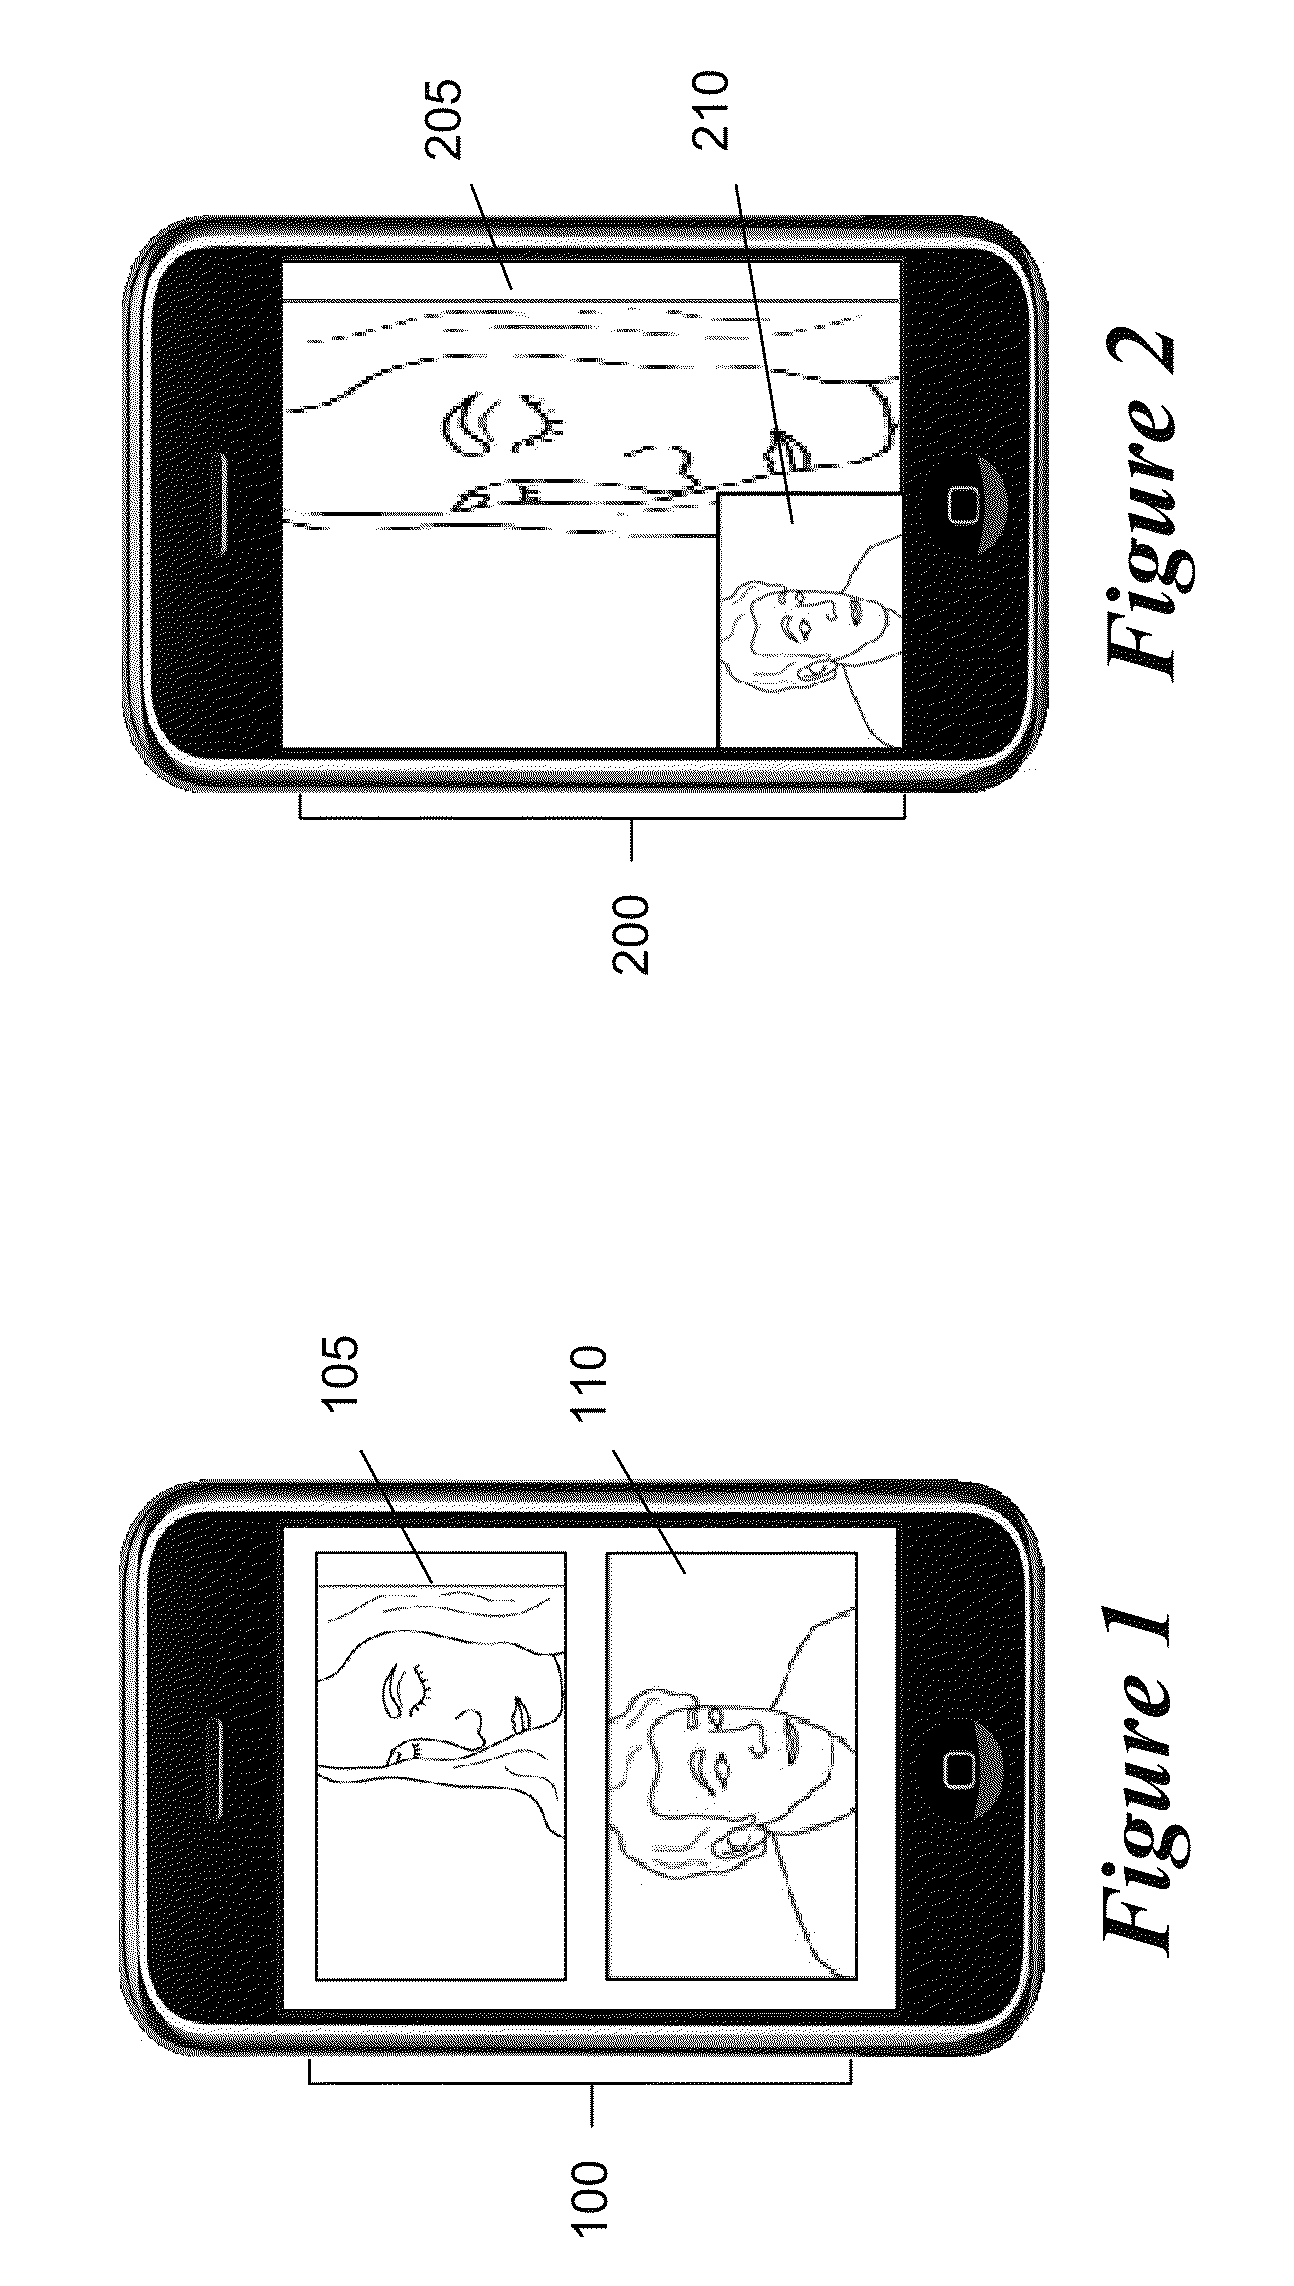 Image Processing for a Dual Camera Mobile Device